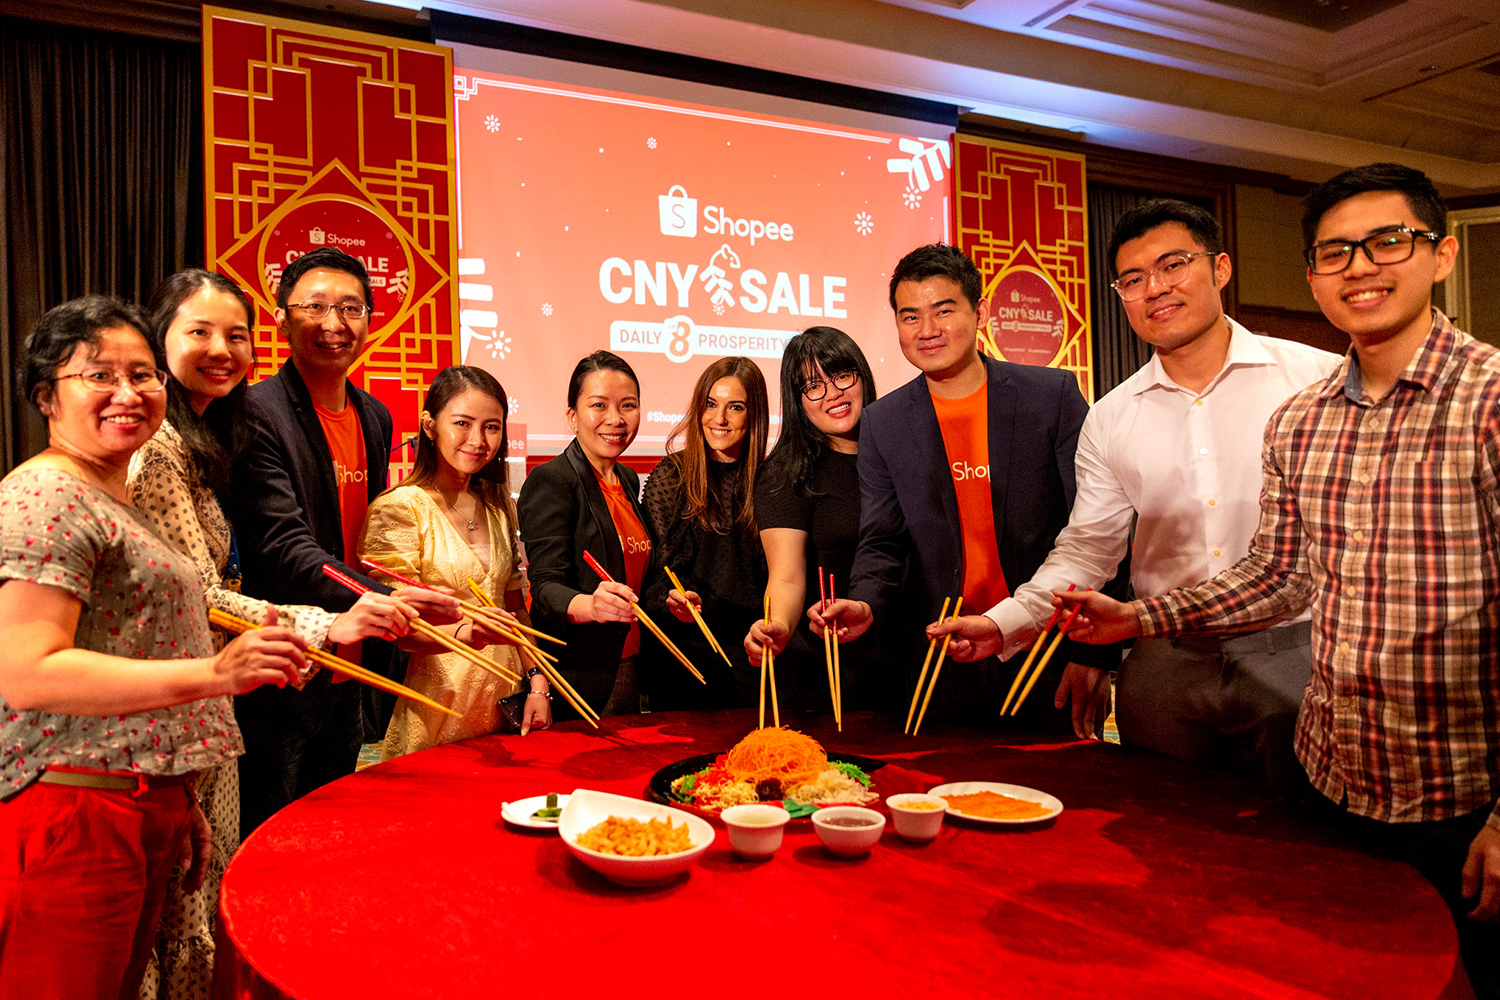 Shopee CNY Sale 2020 Offers Daily RM8 Deals and More